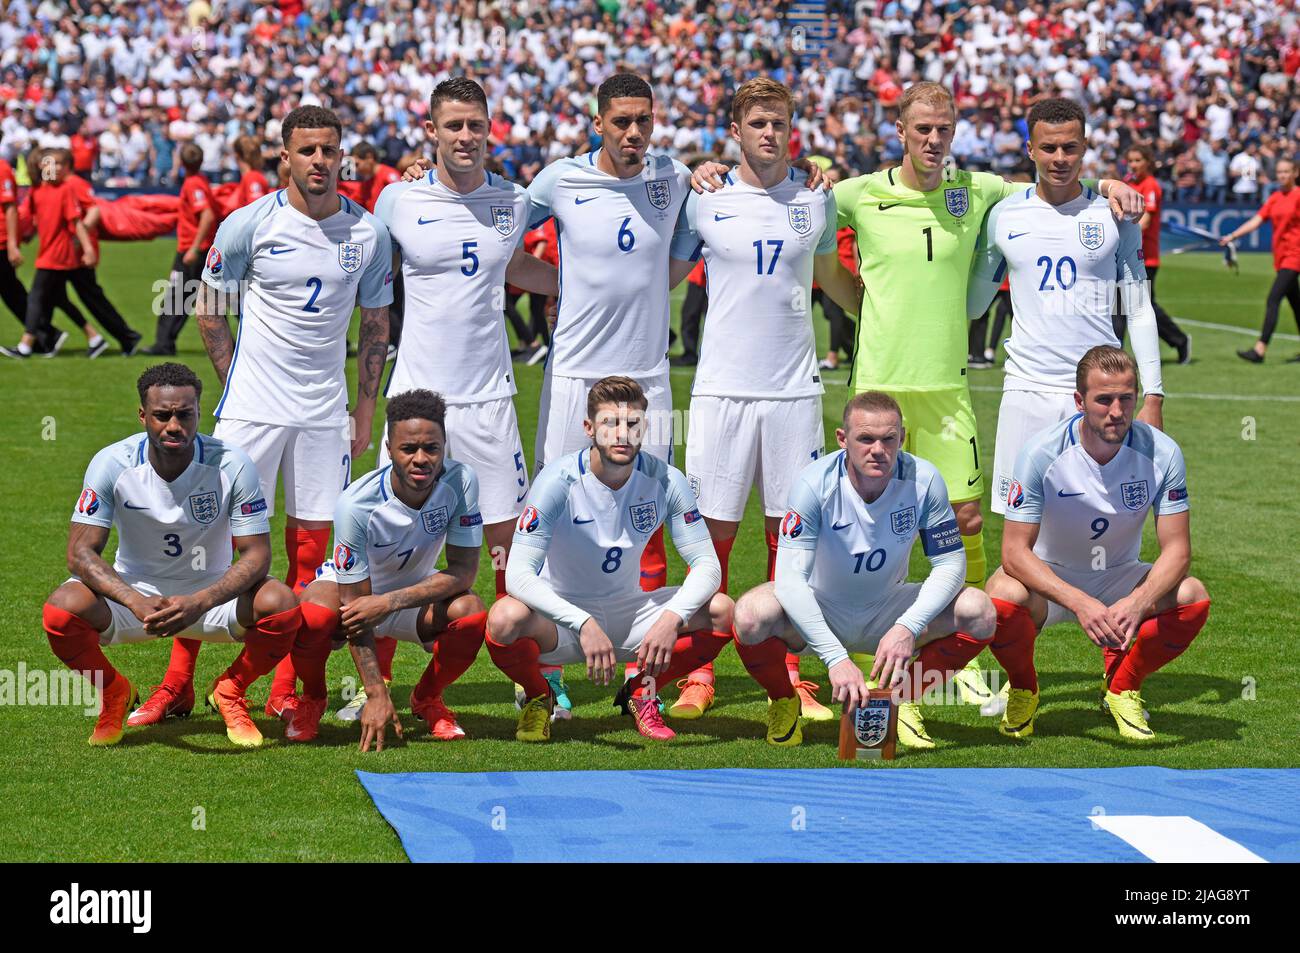 Stock picture of the England team ahead of their match at the Stade Bollaert-Delelis in Lens, France during the Euro 2016 Group B fixture against Wales on 16th June 2016. Stock Photo